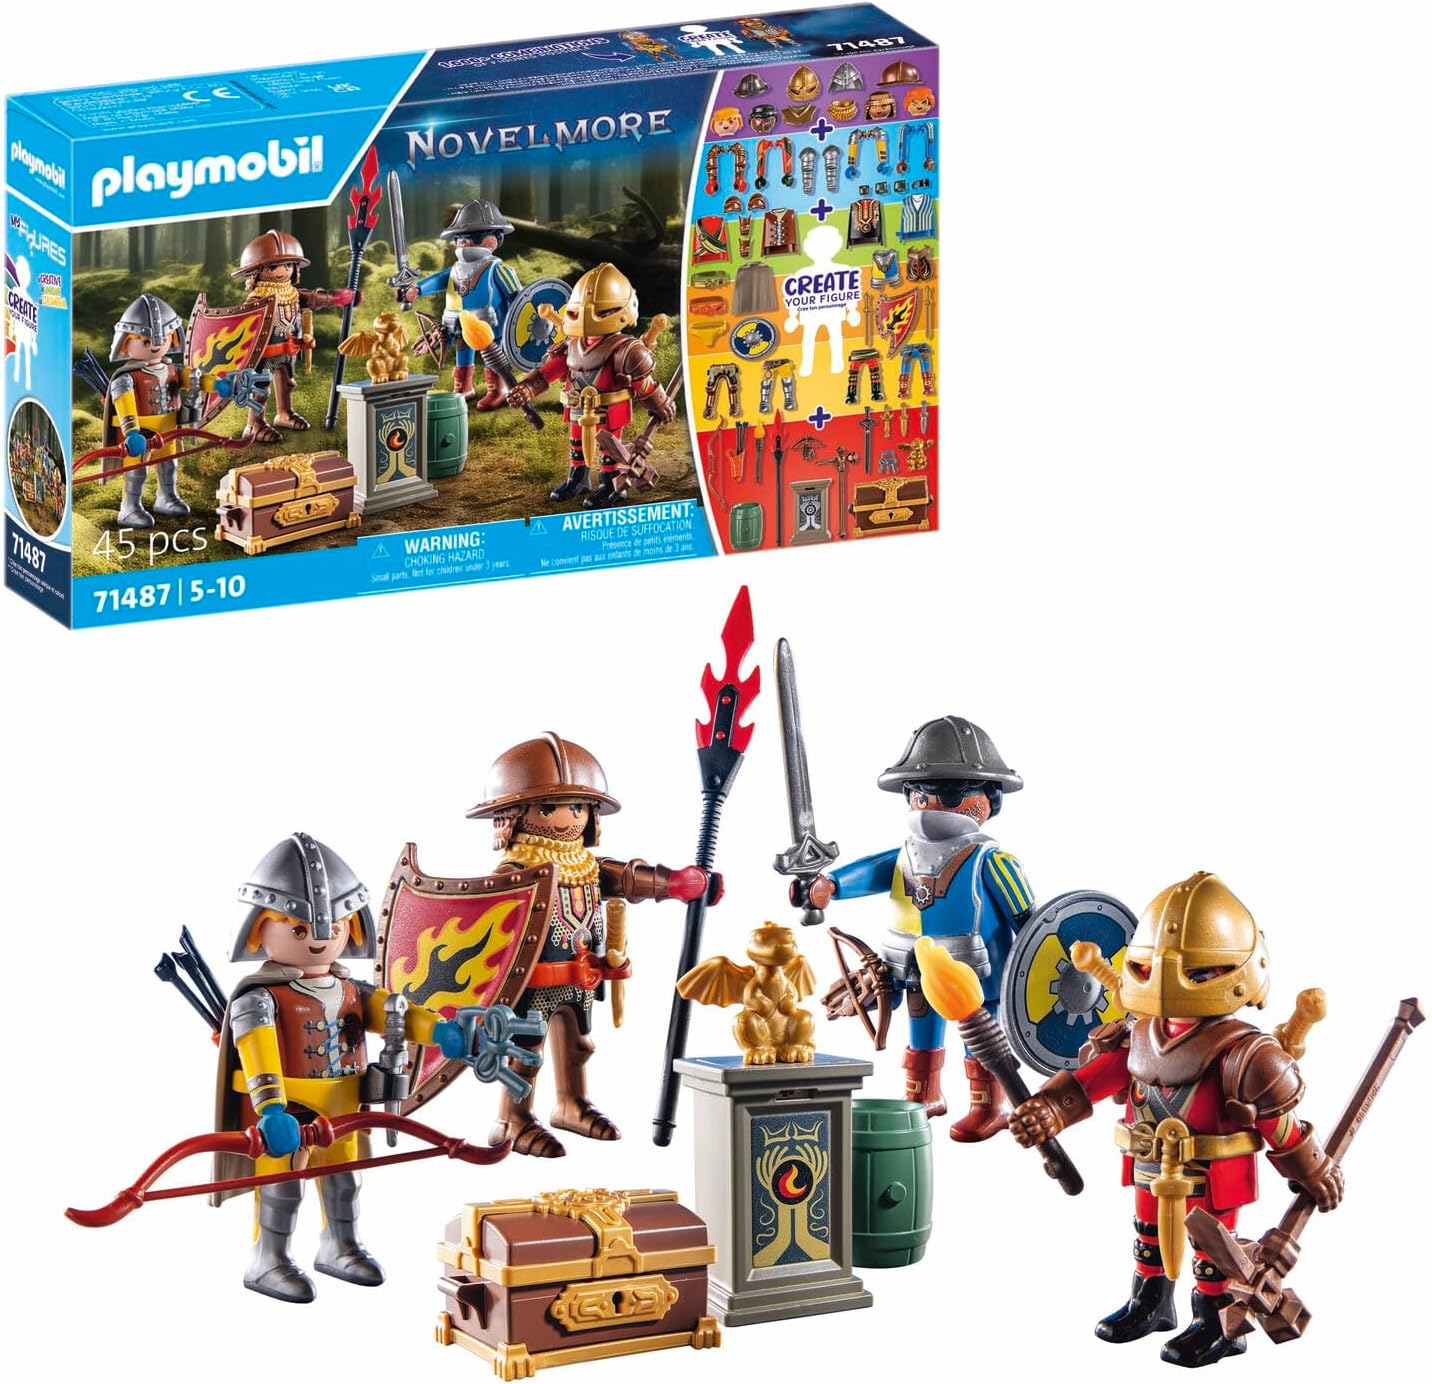 PLAYMOBIL Novelmore 71487 My Figures: Knight of Novelmore, with Two Novelmore Knights and Two Burnham Raiders, Individually Assembled Figures, Detailed Toy for Children Aged 5 and Up